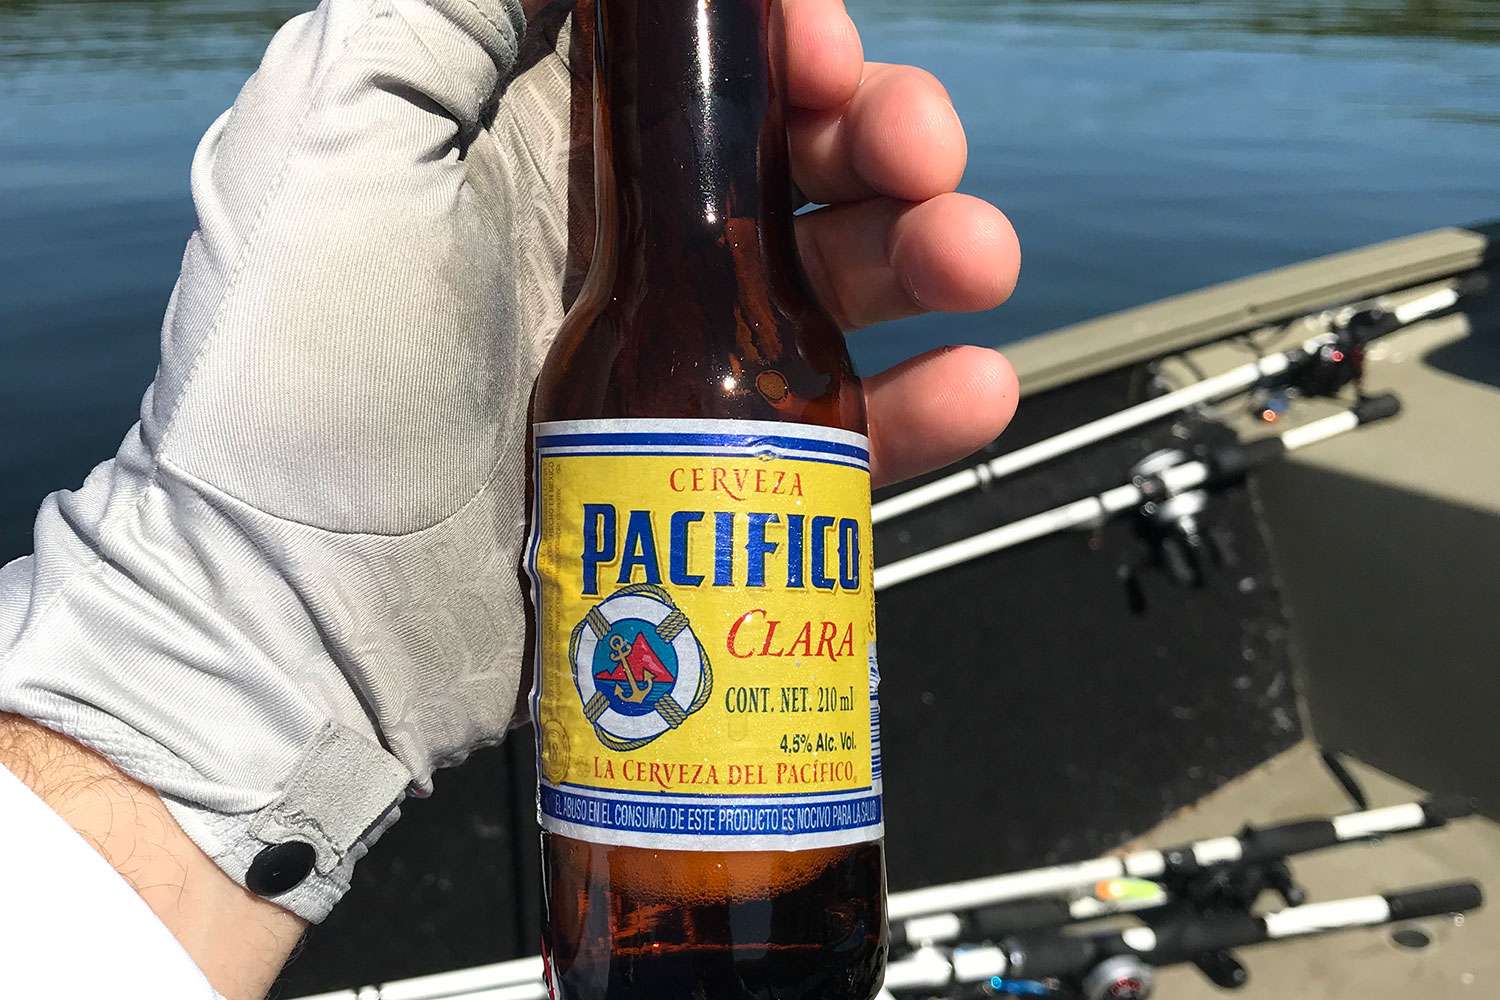 And, if you enjoy a refreshment from time to time, the famous Mexican Pacifico brews make for a fine late-afternoon palate cleanser ...